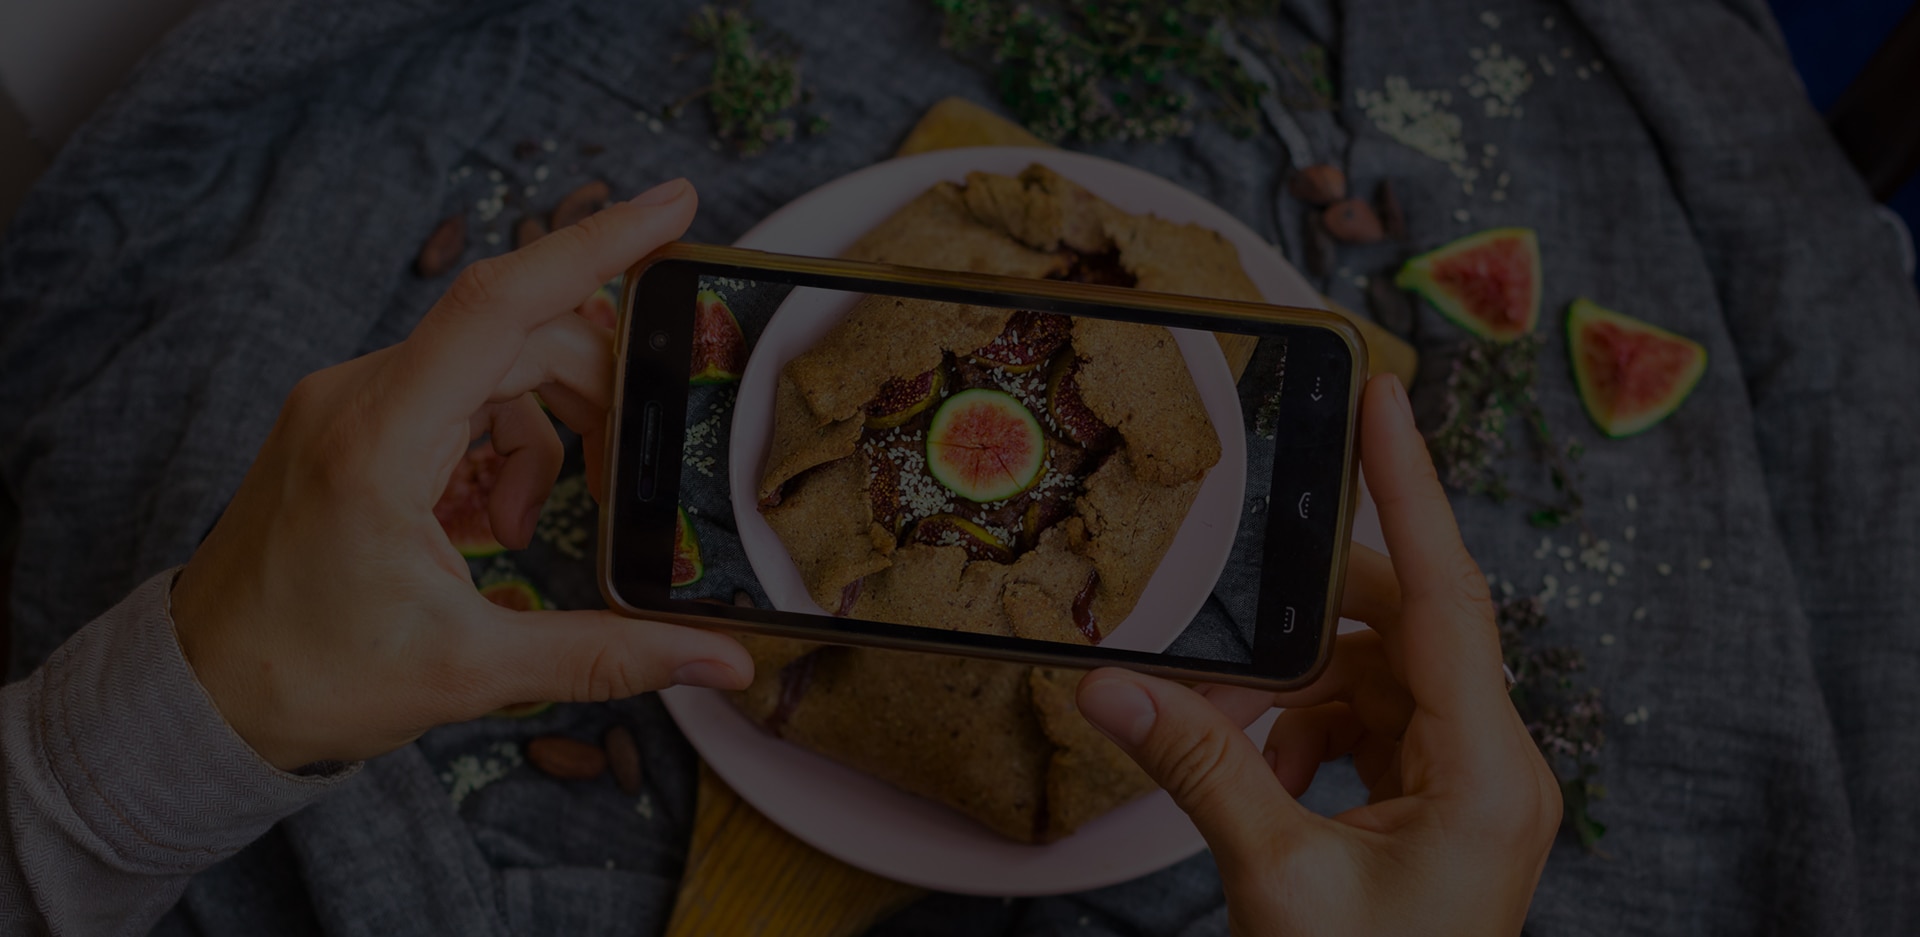 A pair of hands hold a smartphone over a fig pastry while snapping a picture. 'We are what we eat' is superimposed over it.